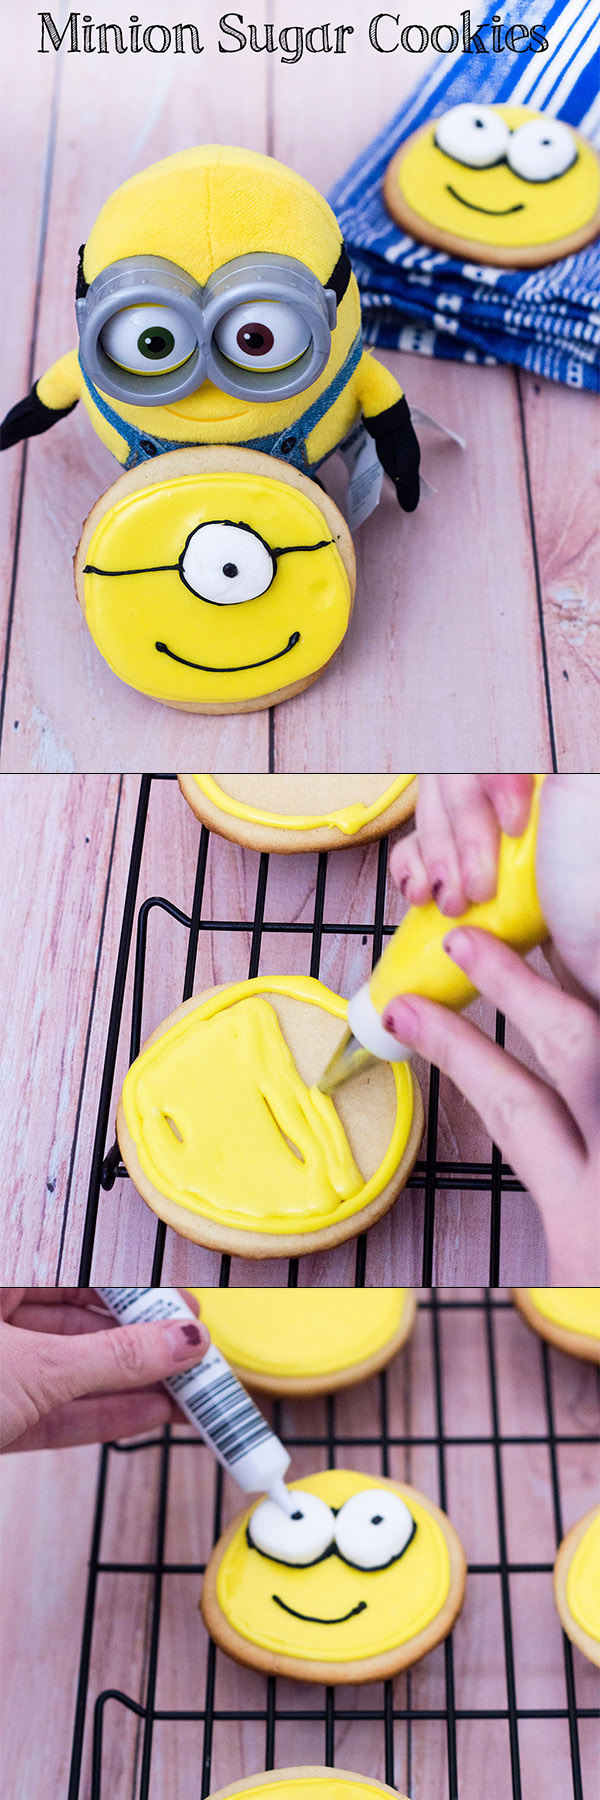 With these no-spread sugar cookies, you can serve delicious minion-inspired treats at your next family movie night! #MinionsMovieNight TheRedheadBaker.com